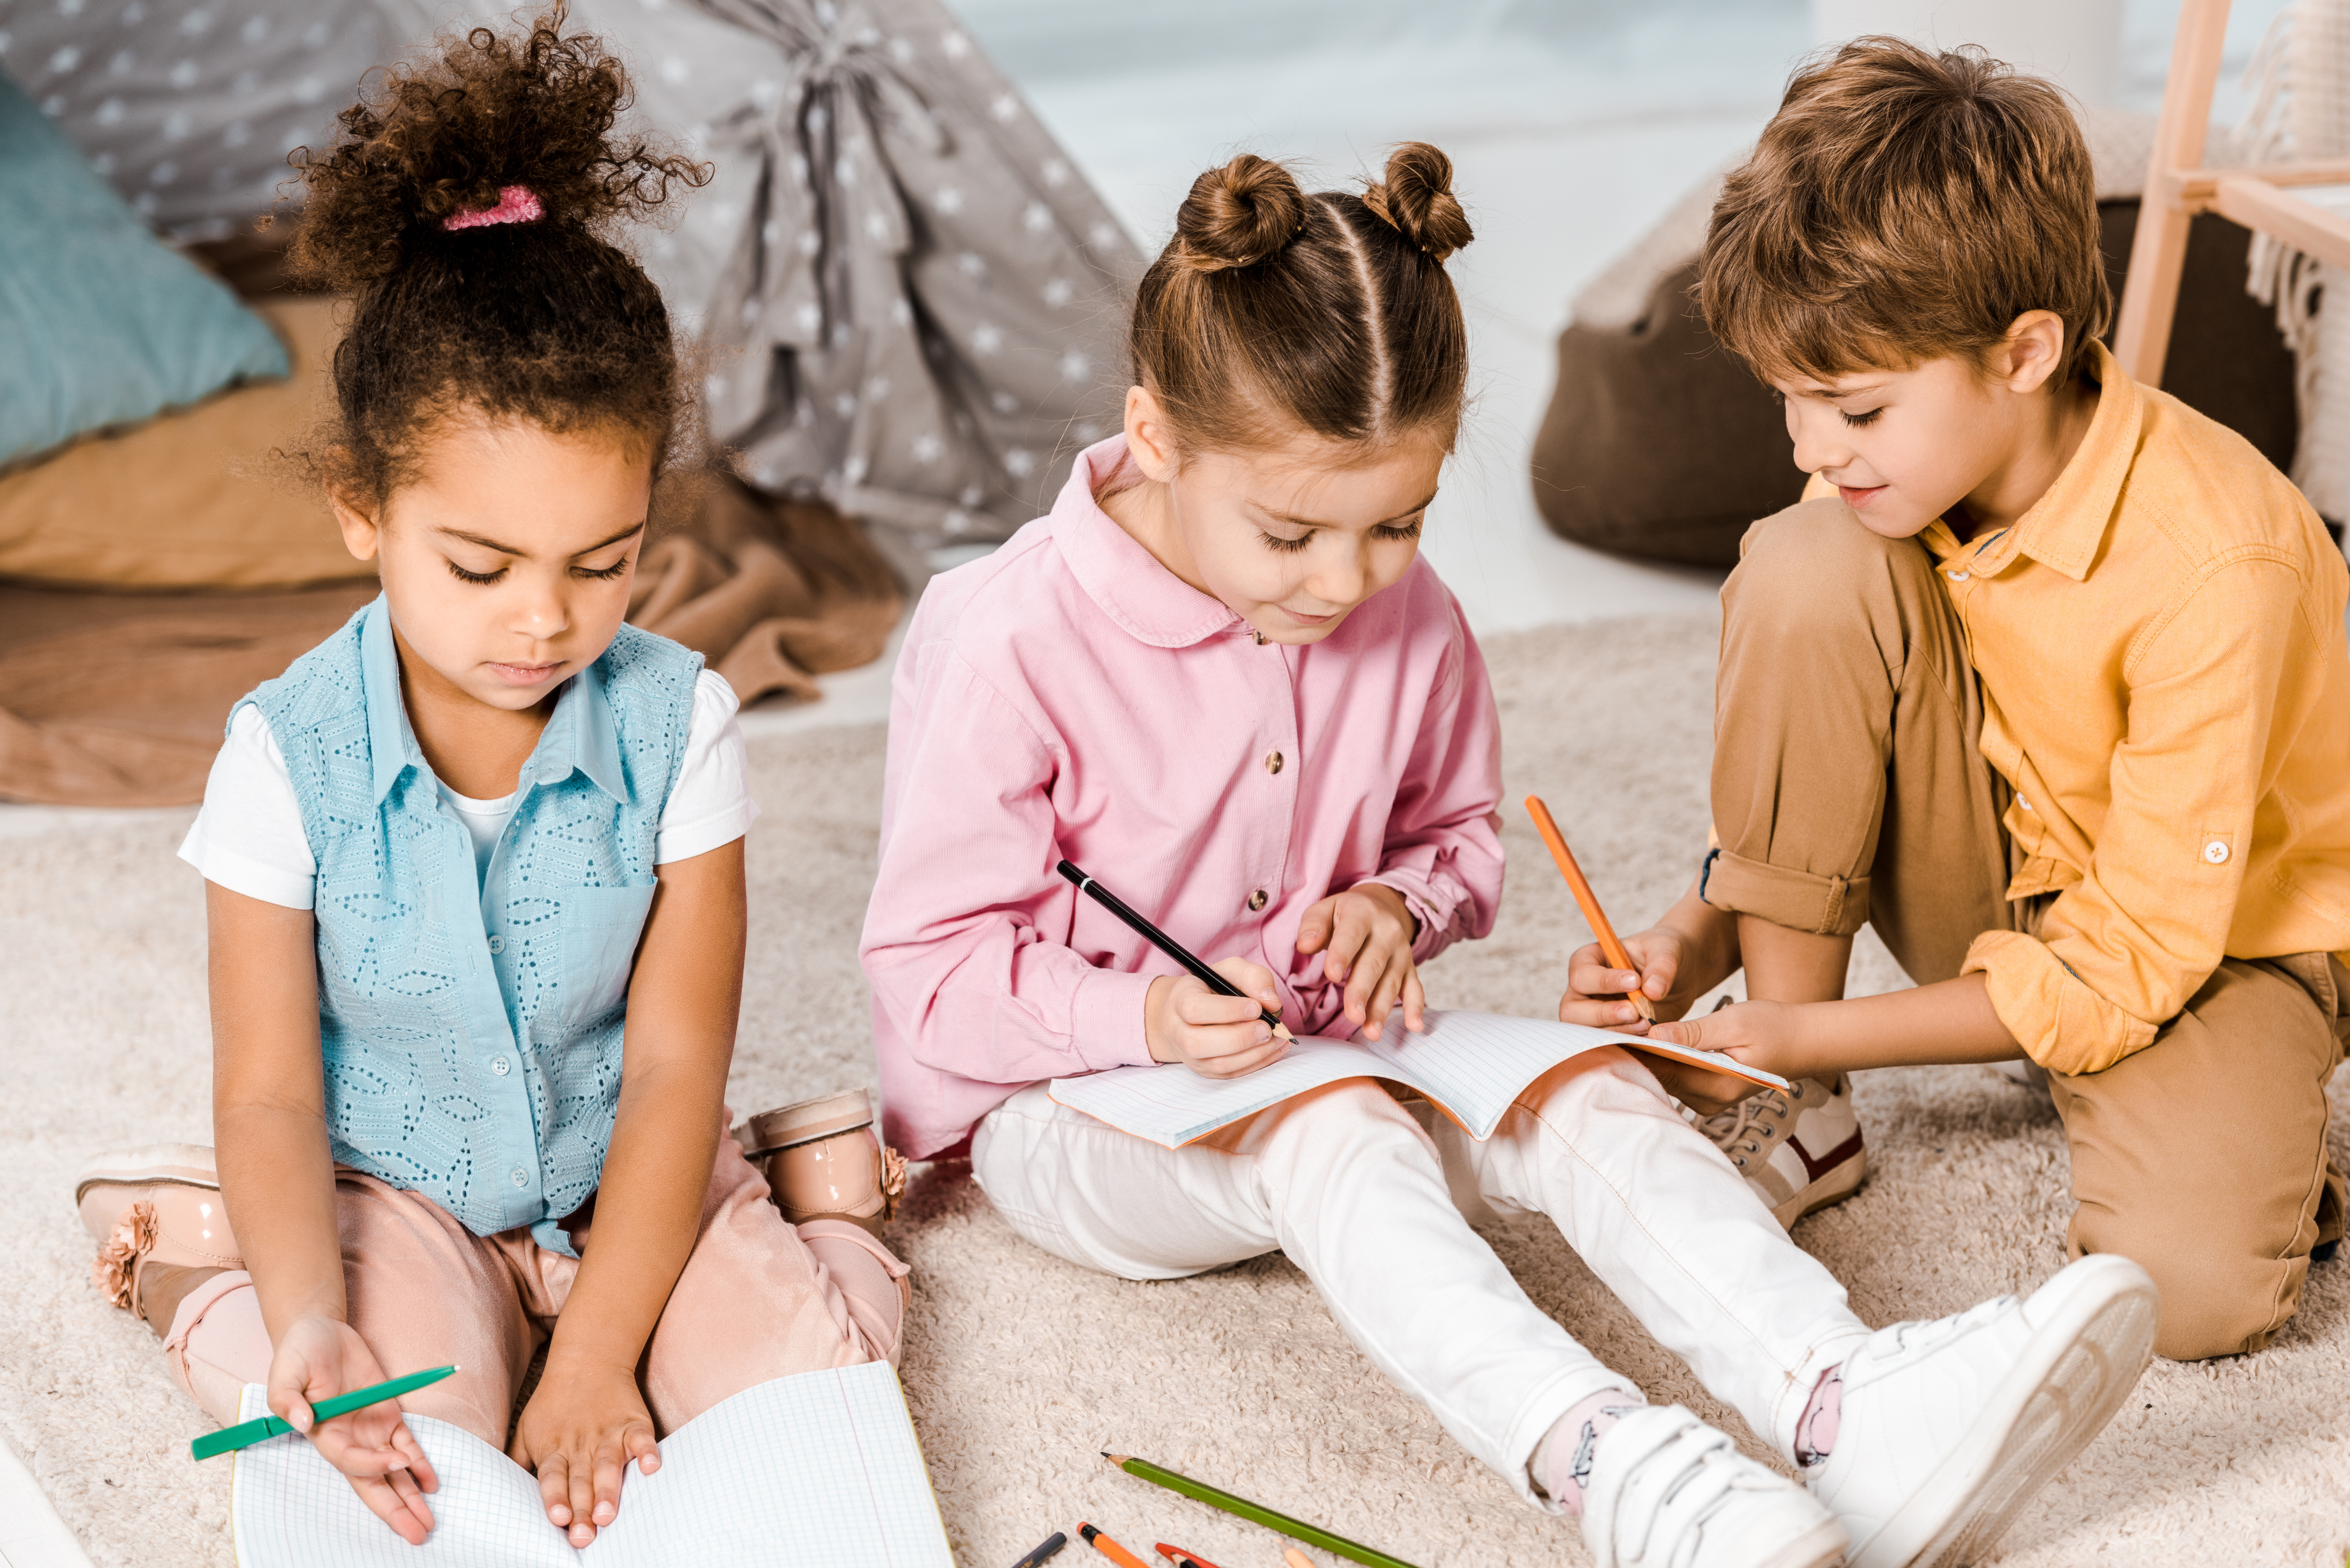 Plan activities for when children first arrive to Sunday School to minimize behavior issues